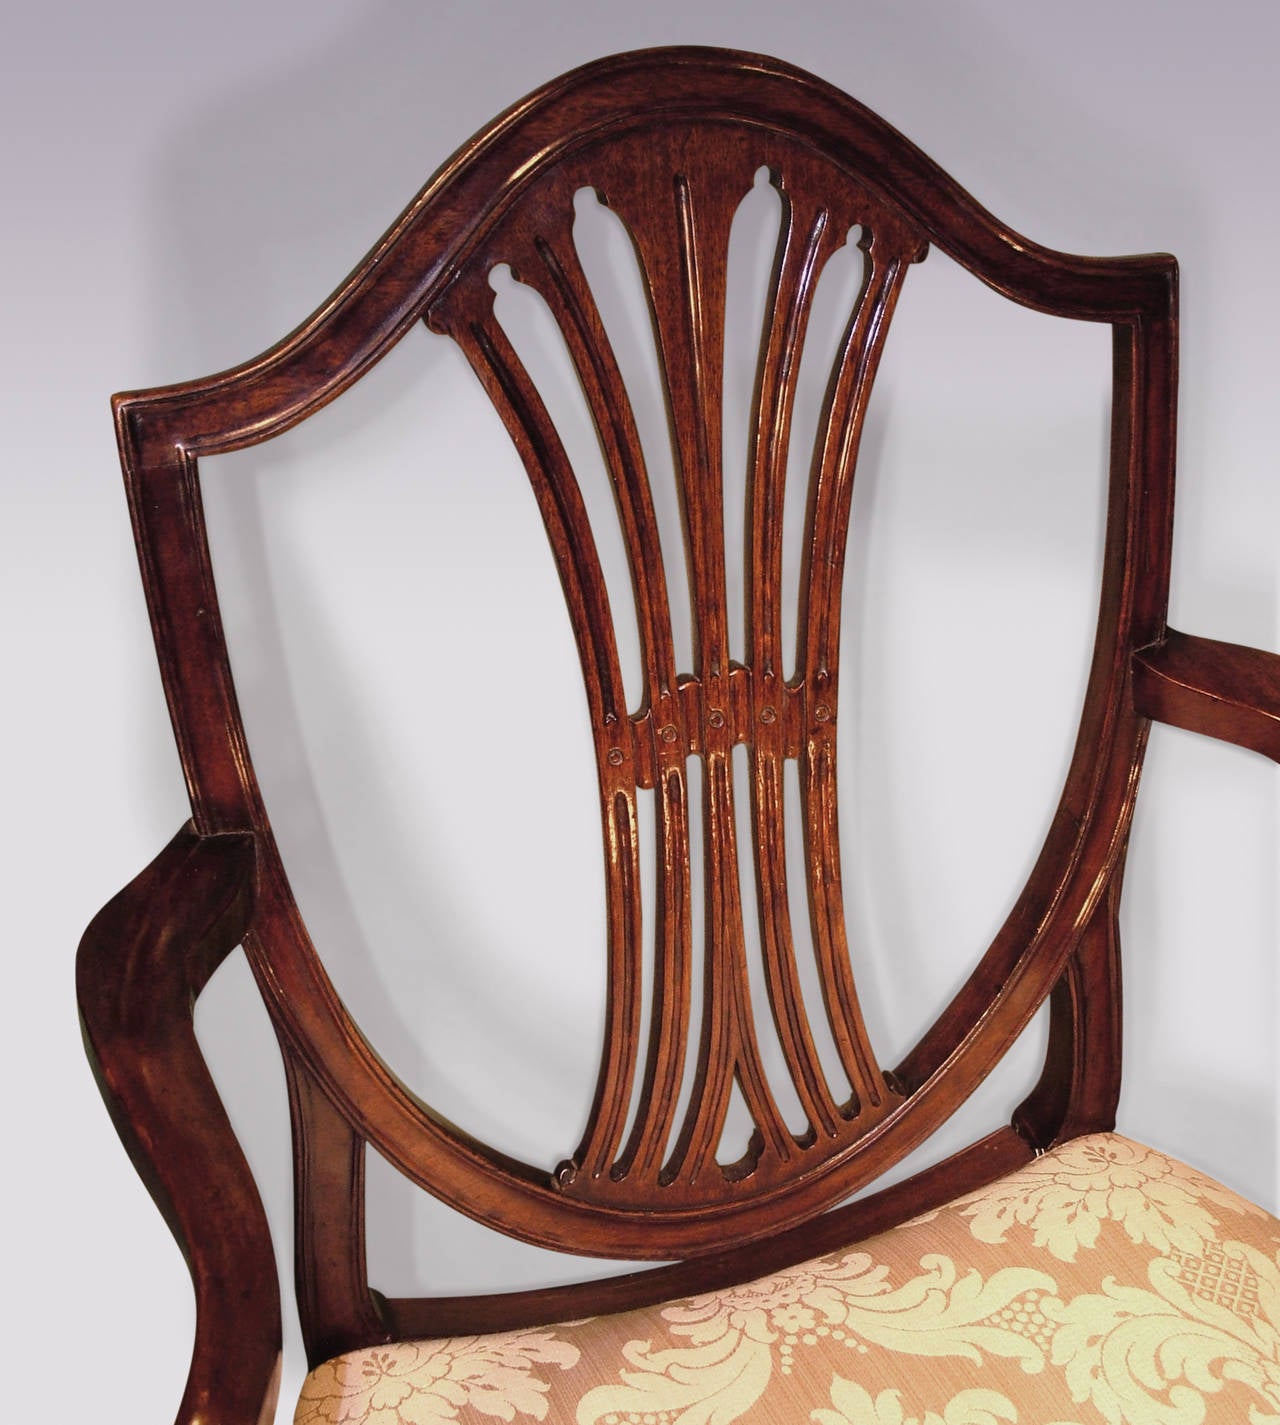 A set of six single and two-arm late 18th century Hepplewhite period mahogany dining chairs, having moulded shield shaped backs with carved central splats and shaped set back arms, above saddled seats supported on moulded square tapering legs. (One